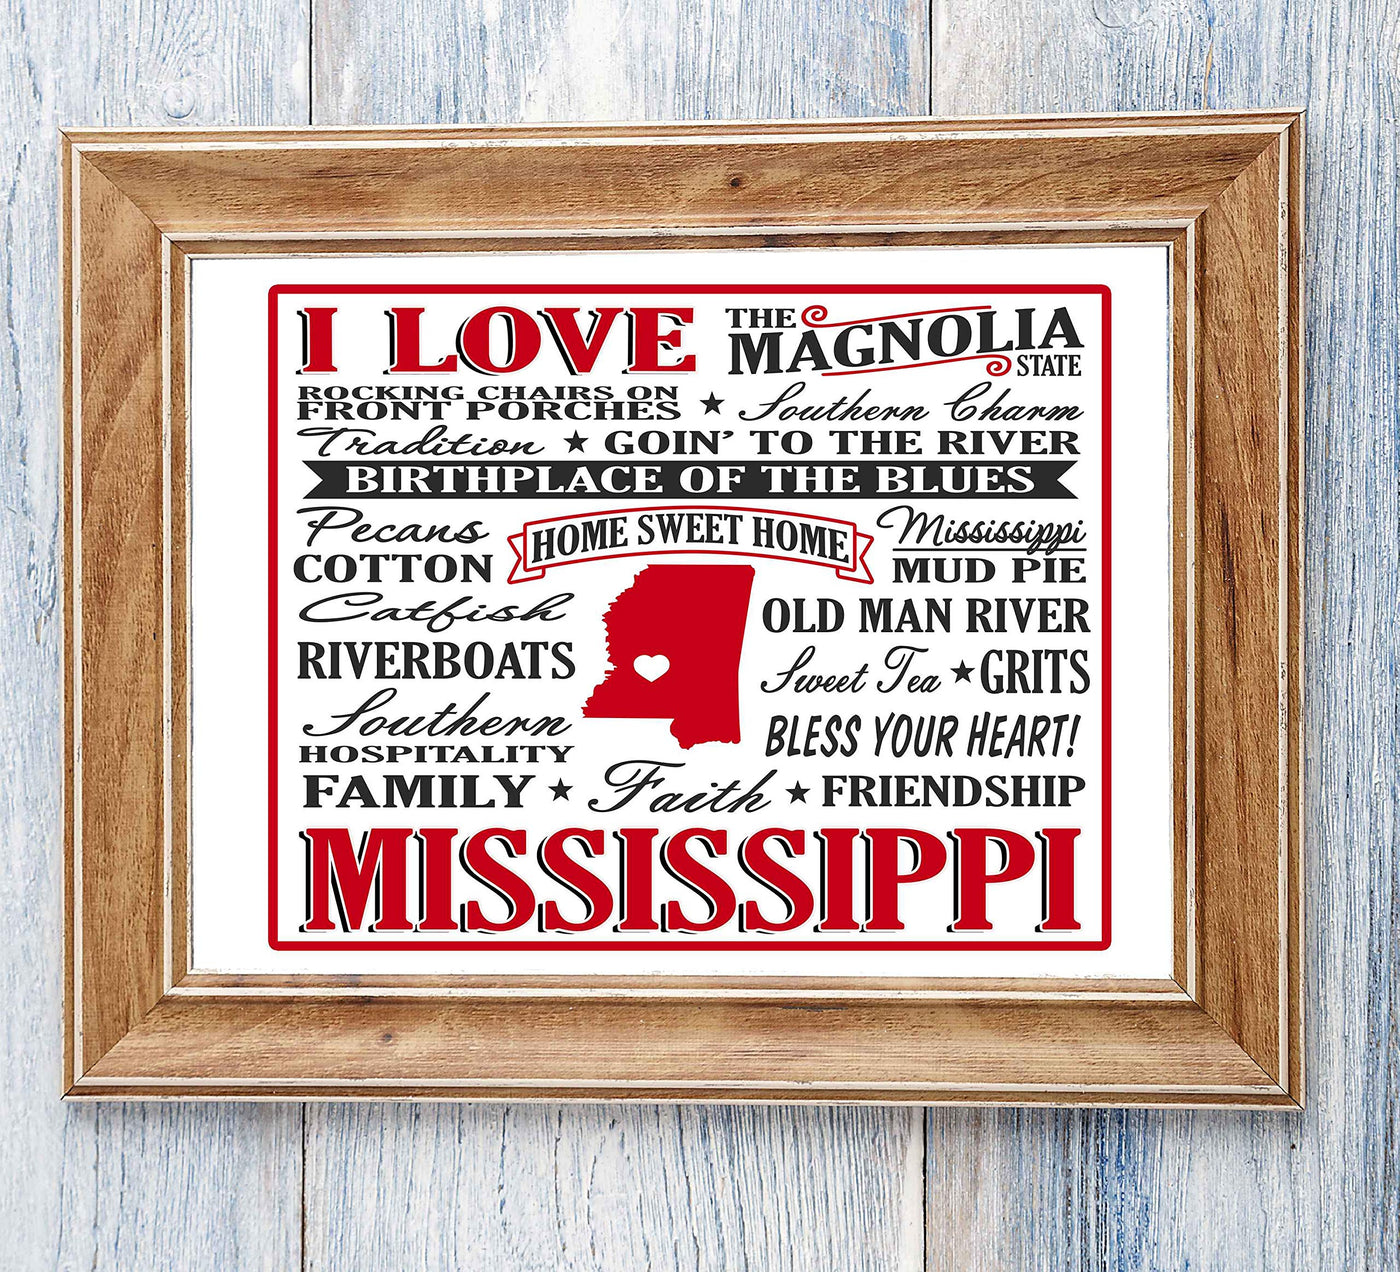 I Love Mississippi Because- Word Art Wall Sign- 10 x 8" -Vintage Typographic Poster Print-Ready to Frame. Perfect Decor for Home-Office-Studio-Bar-Cafe-Dorm. Great Display of State Pride!